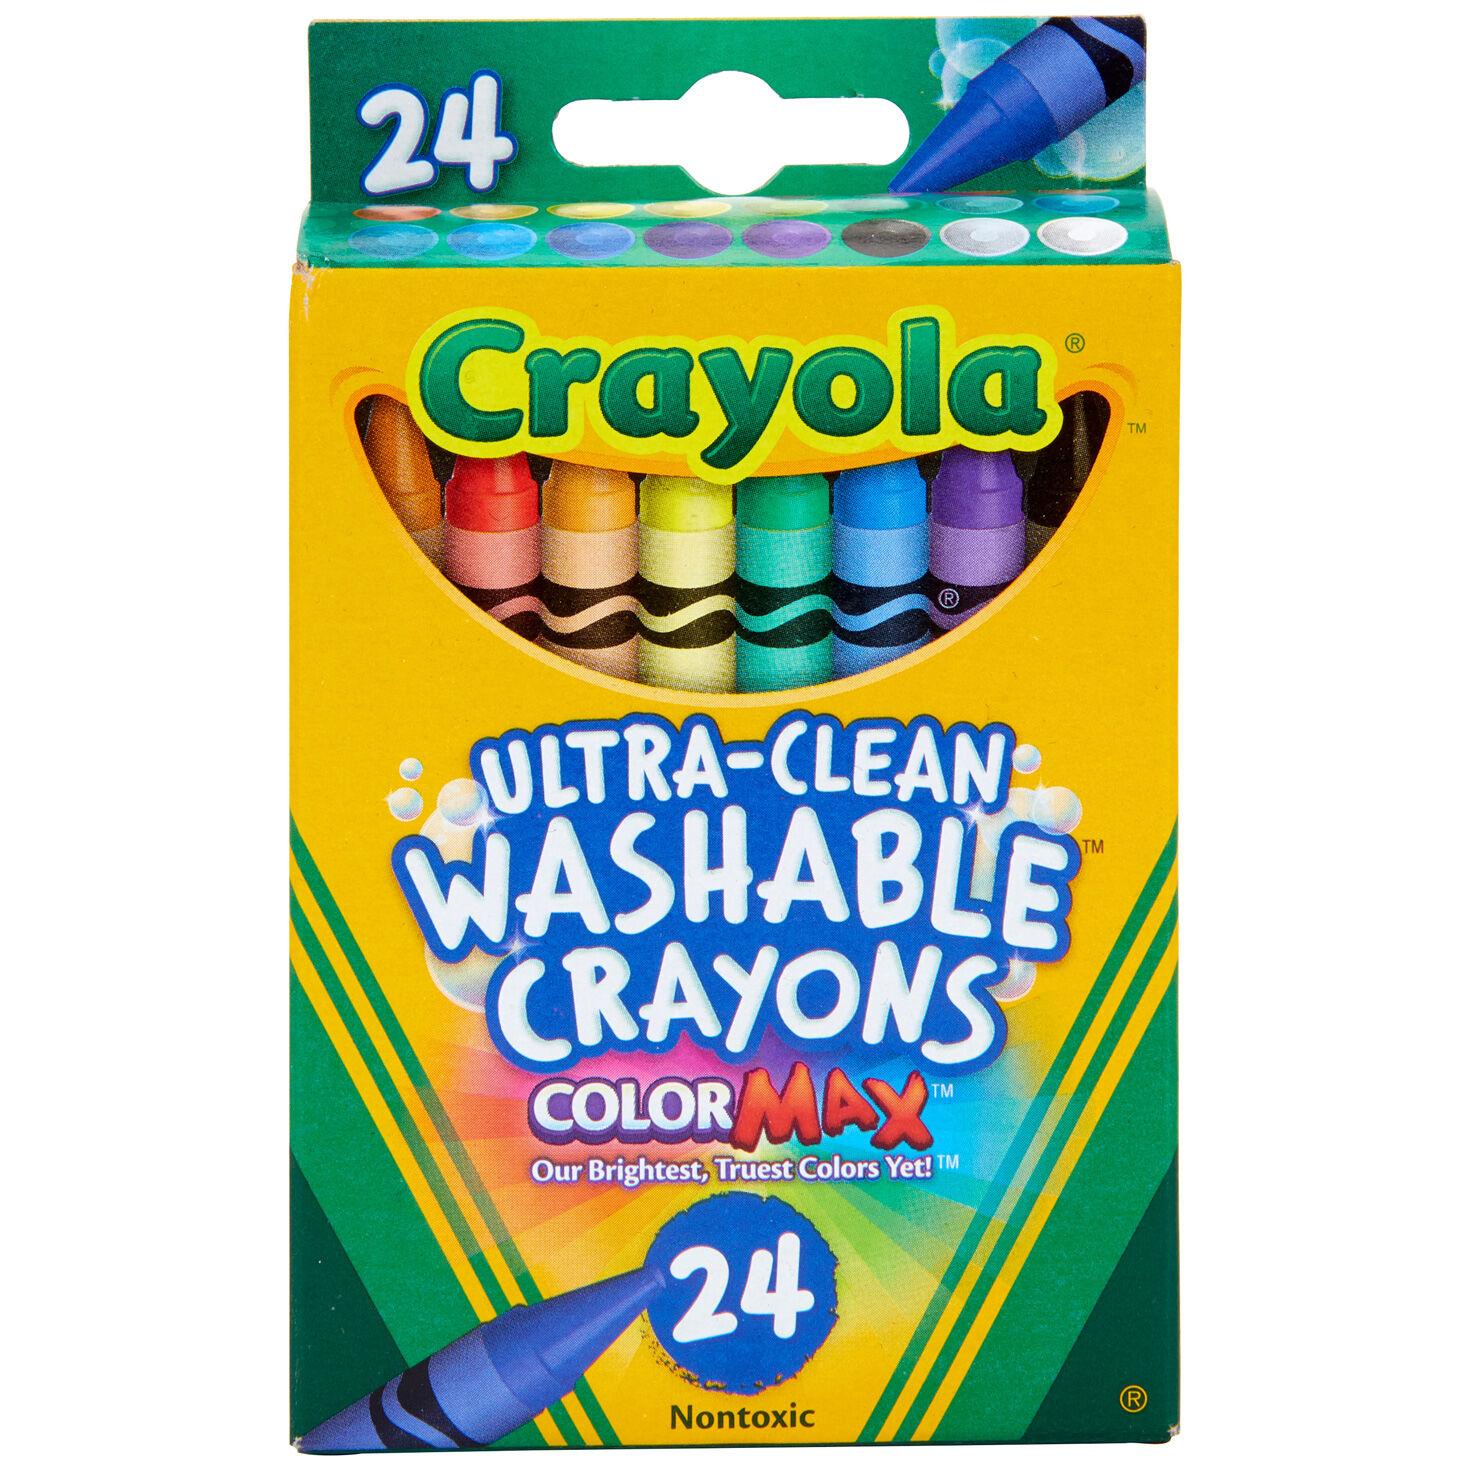 https://www.hallmark.com/dw/image/v2/AALB_PRD/on/demandware.static/-/Sites-hallmark-master/default/dwf3be685c/images/finished-goods/products/526924/Crayola-24Count-UltraClean-Washable-Crayons_526924_01.jpg?sfrm=jpg